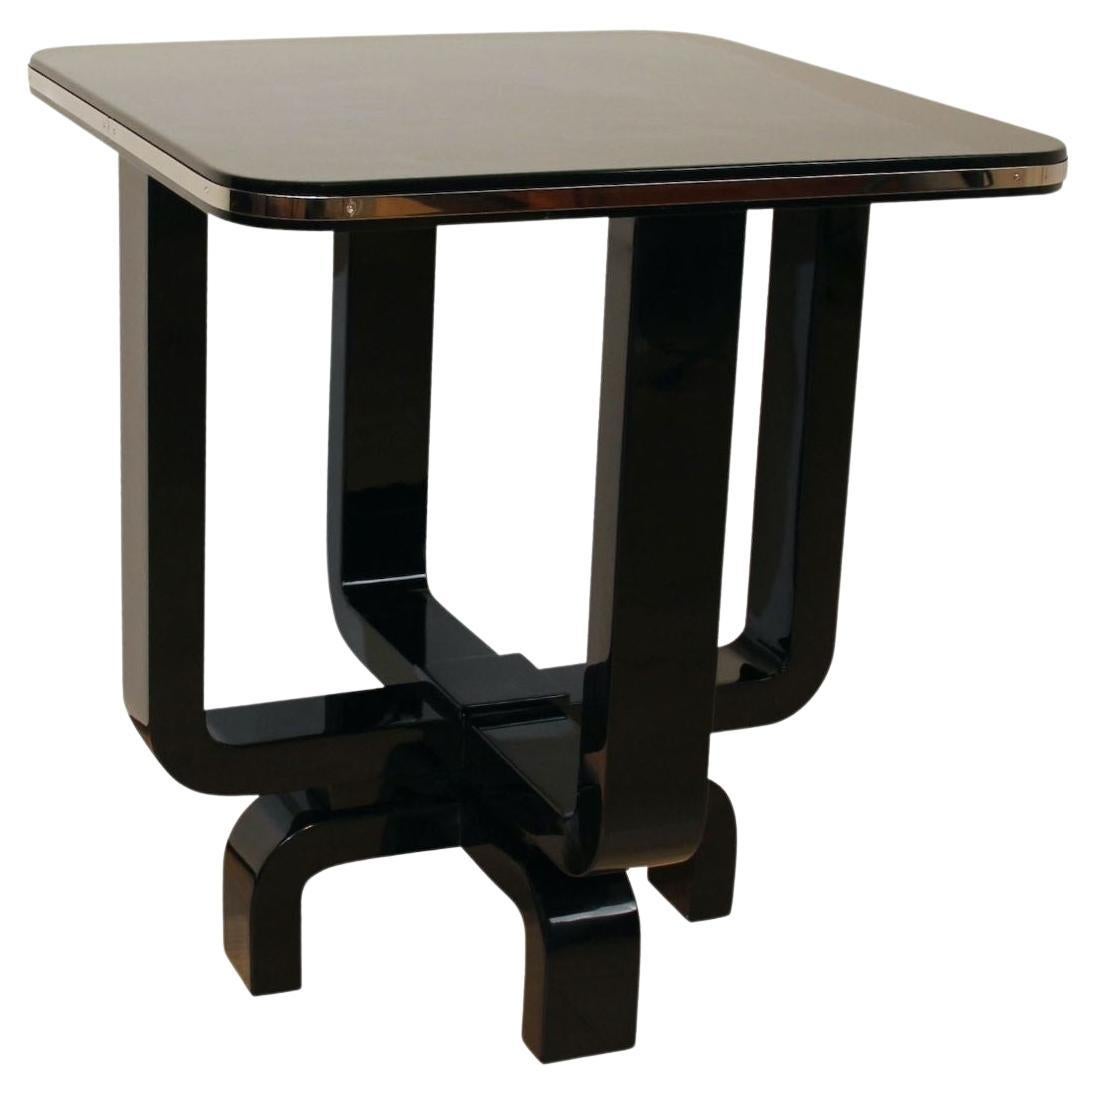 Four-legged Art Deco Side Table, Black Lacquer and Metal, France circa 193